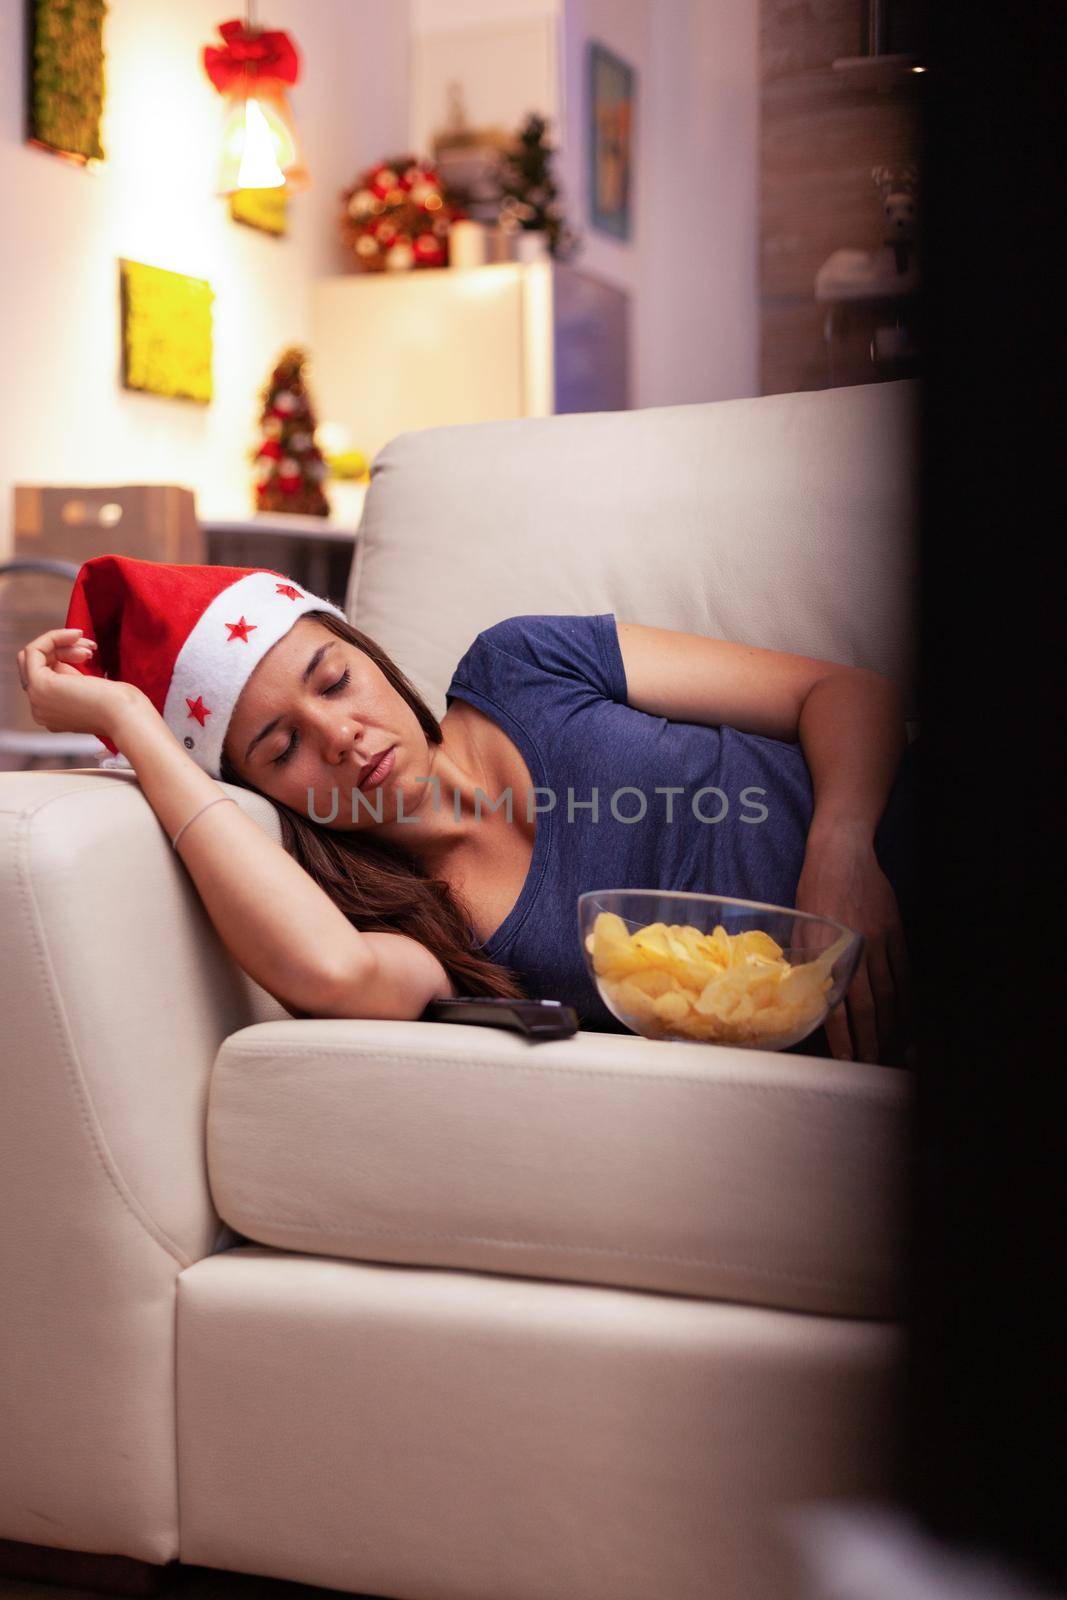 Woman sleeping on couch after watching xmas comedy movie on television in x-mas decorated kitchen. Girl enjoying winter season celebrating christmas holiday alone at home